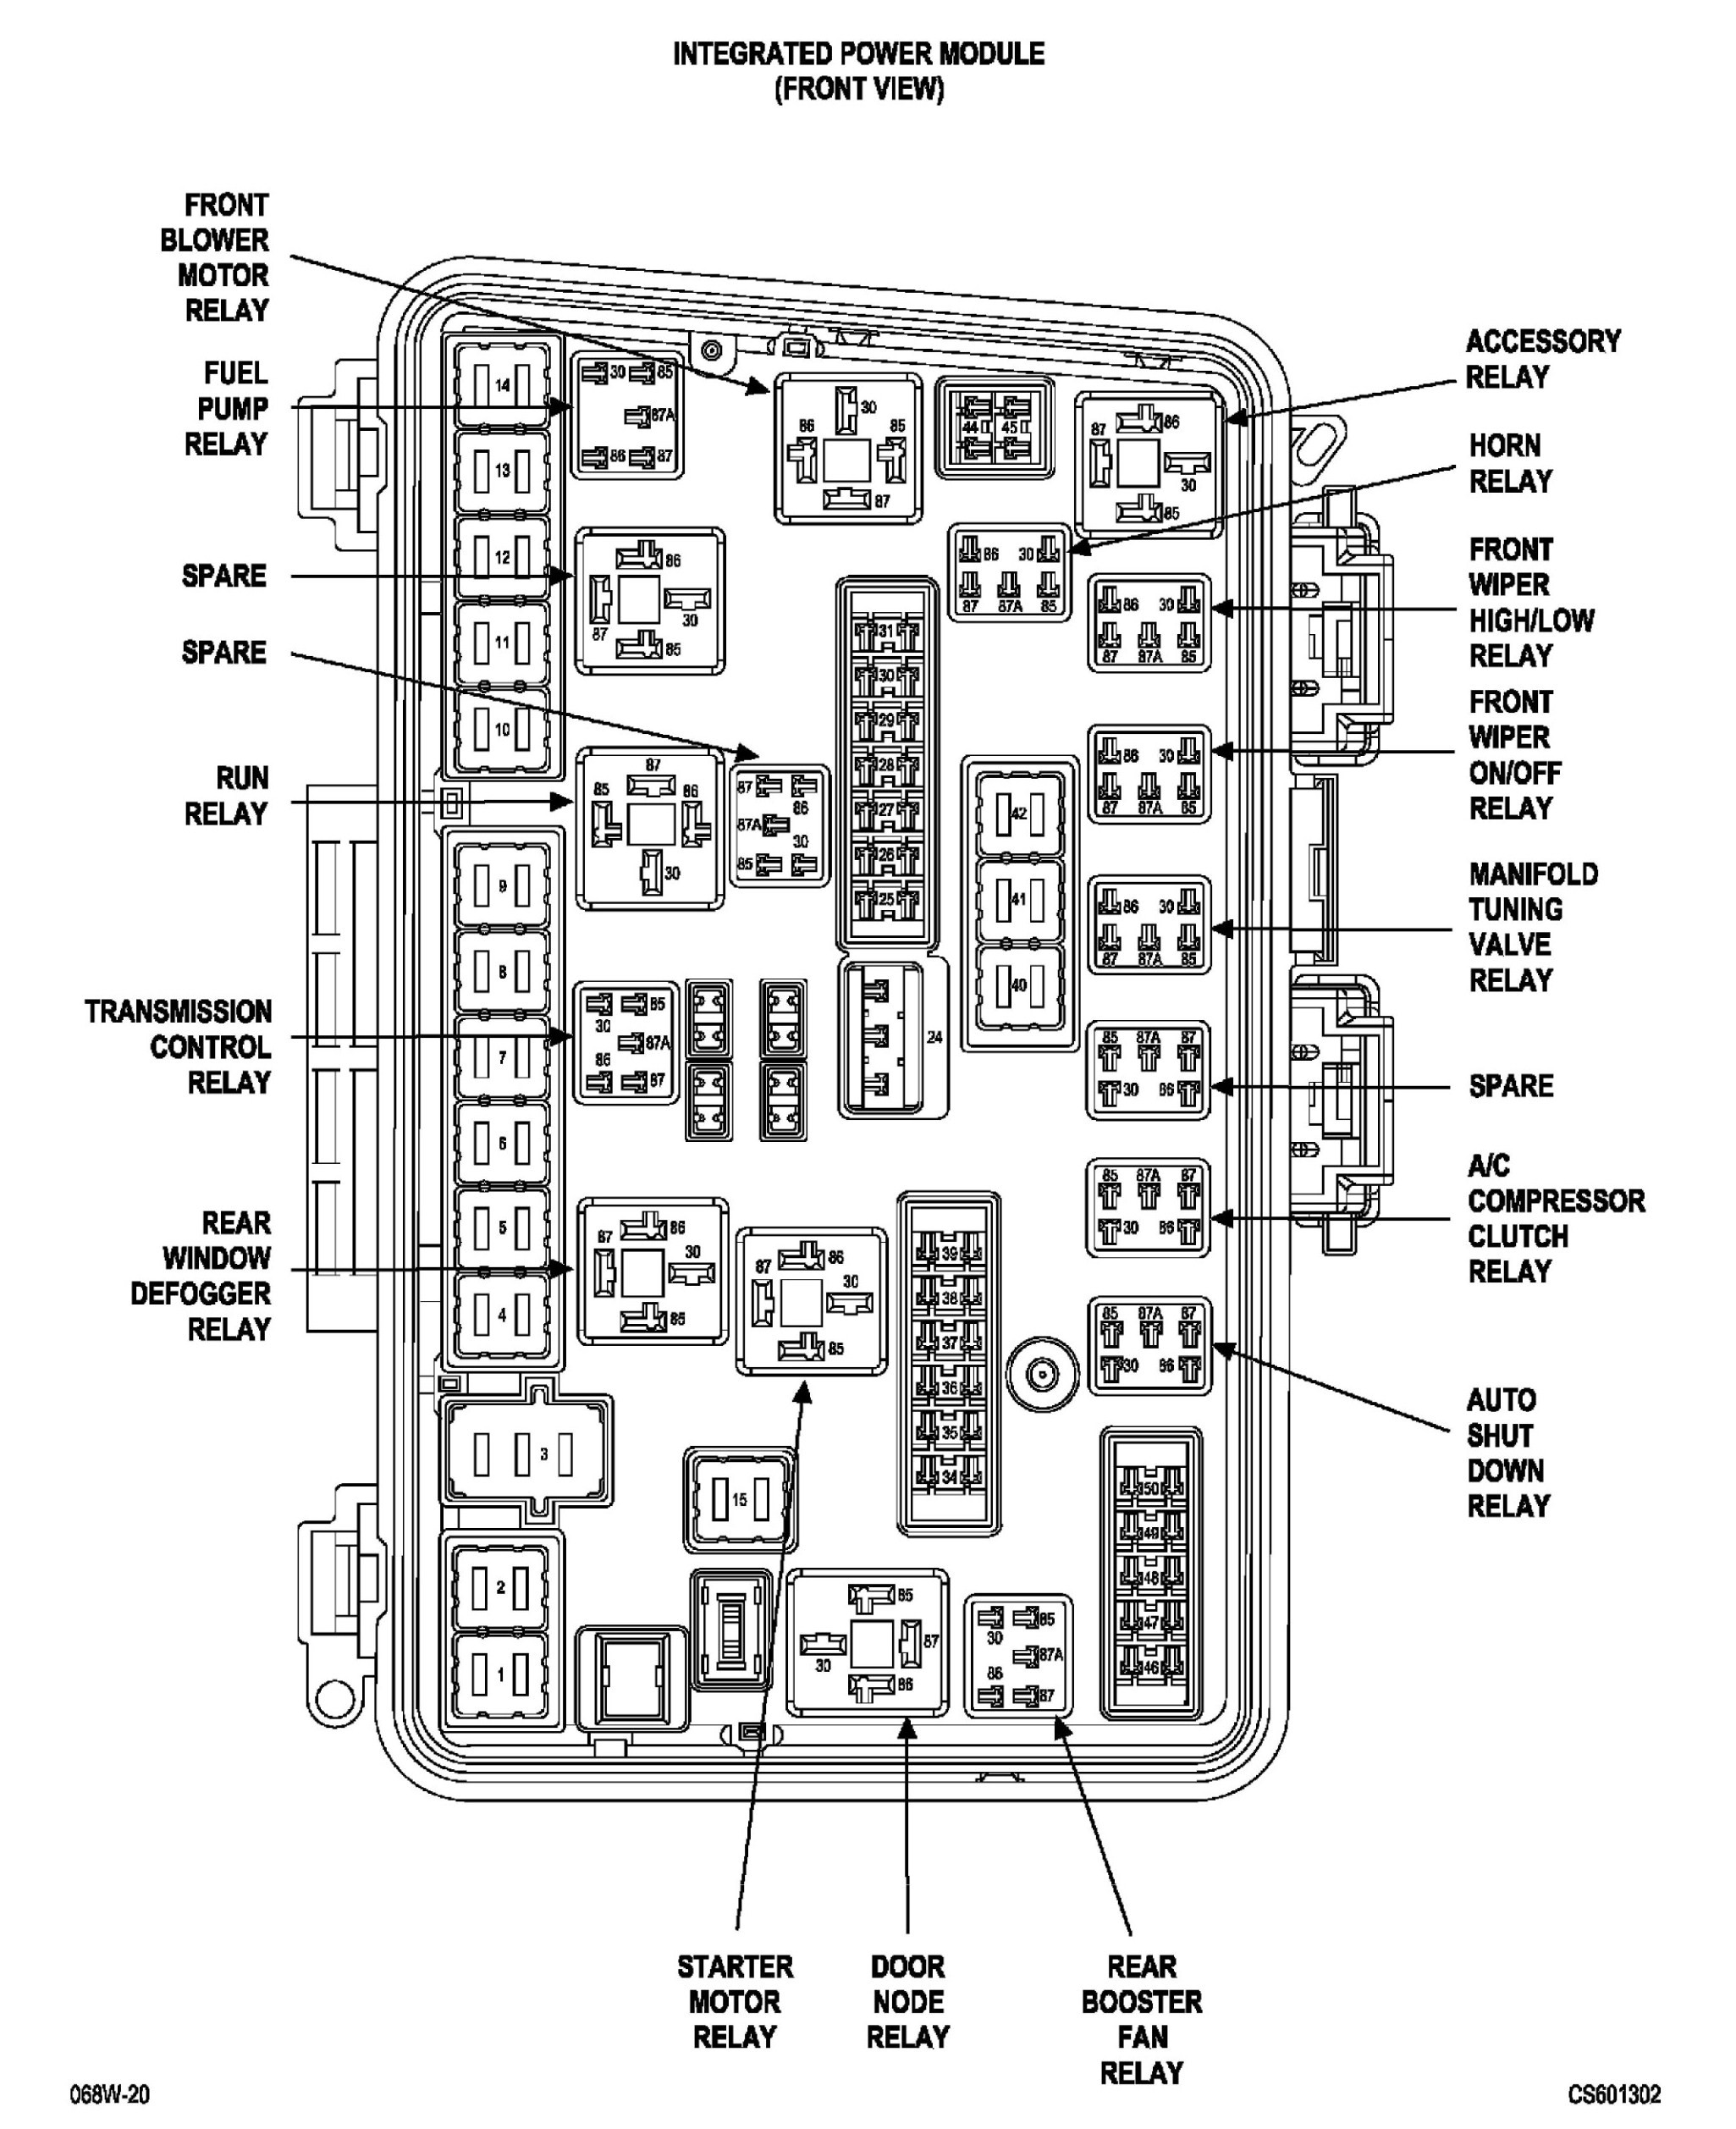 2006 Chrysler Pacifica Engine Diagram Chrysler Pacifica Lighter Fuse Box Wiring Diagrams Of 2006 Chrysler Pacifica Engine Diagram